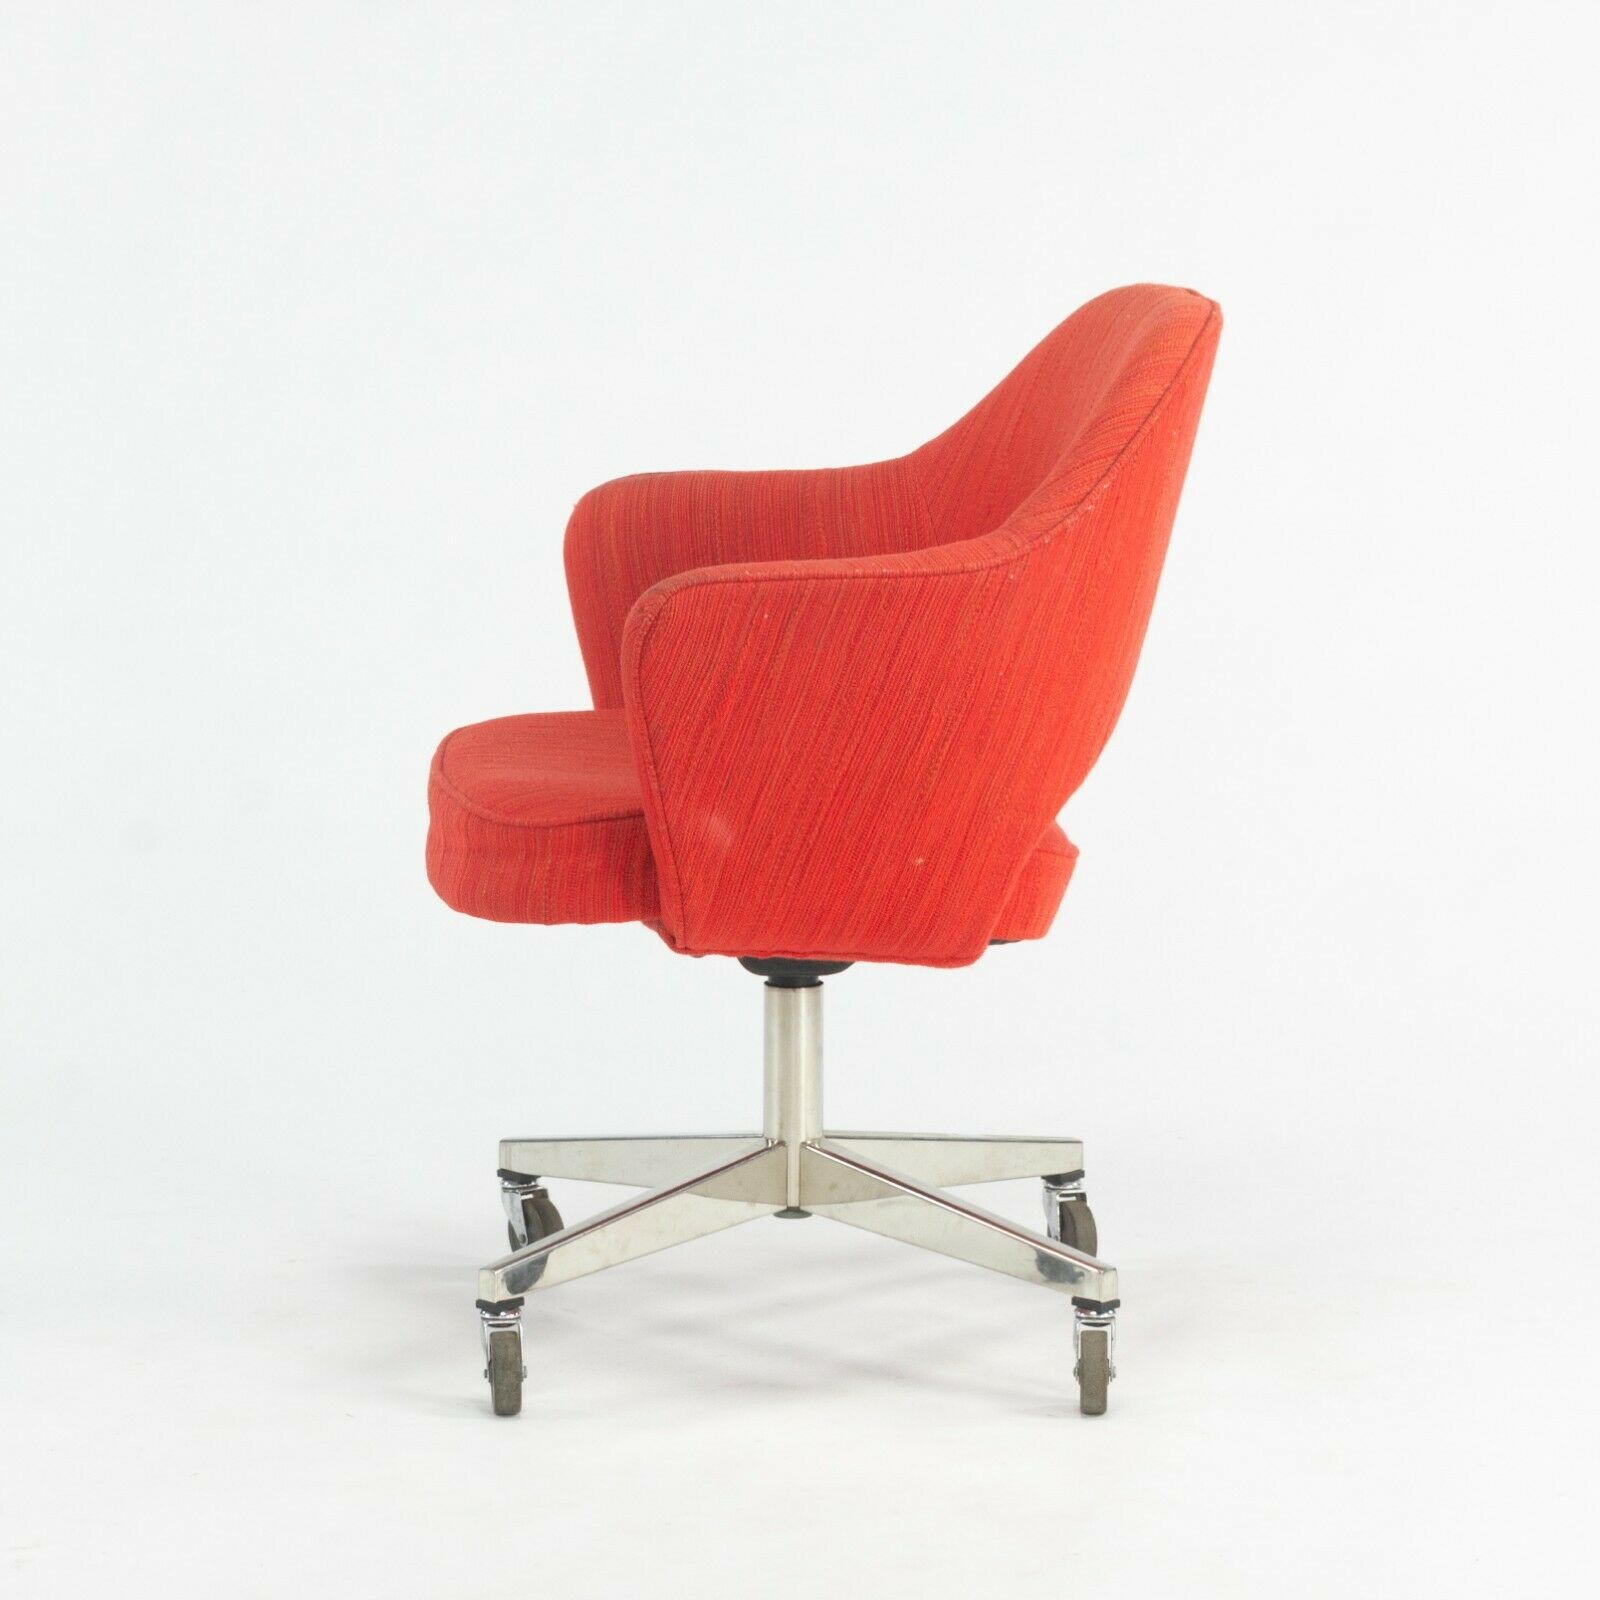 1974 Eero Saarinen for Knoll Rolling Executive Office Chairs Original Red Fabric